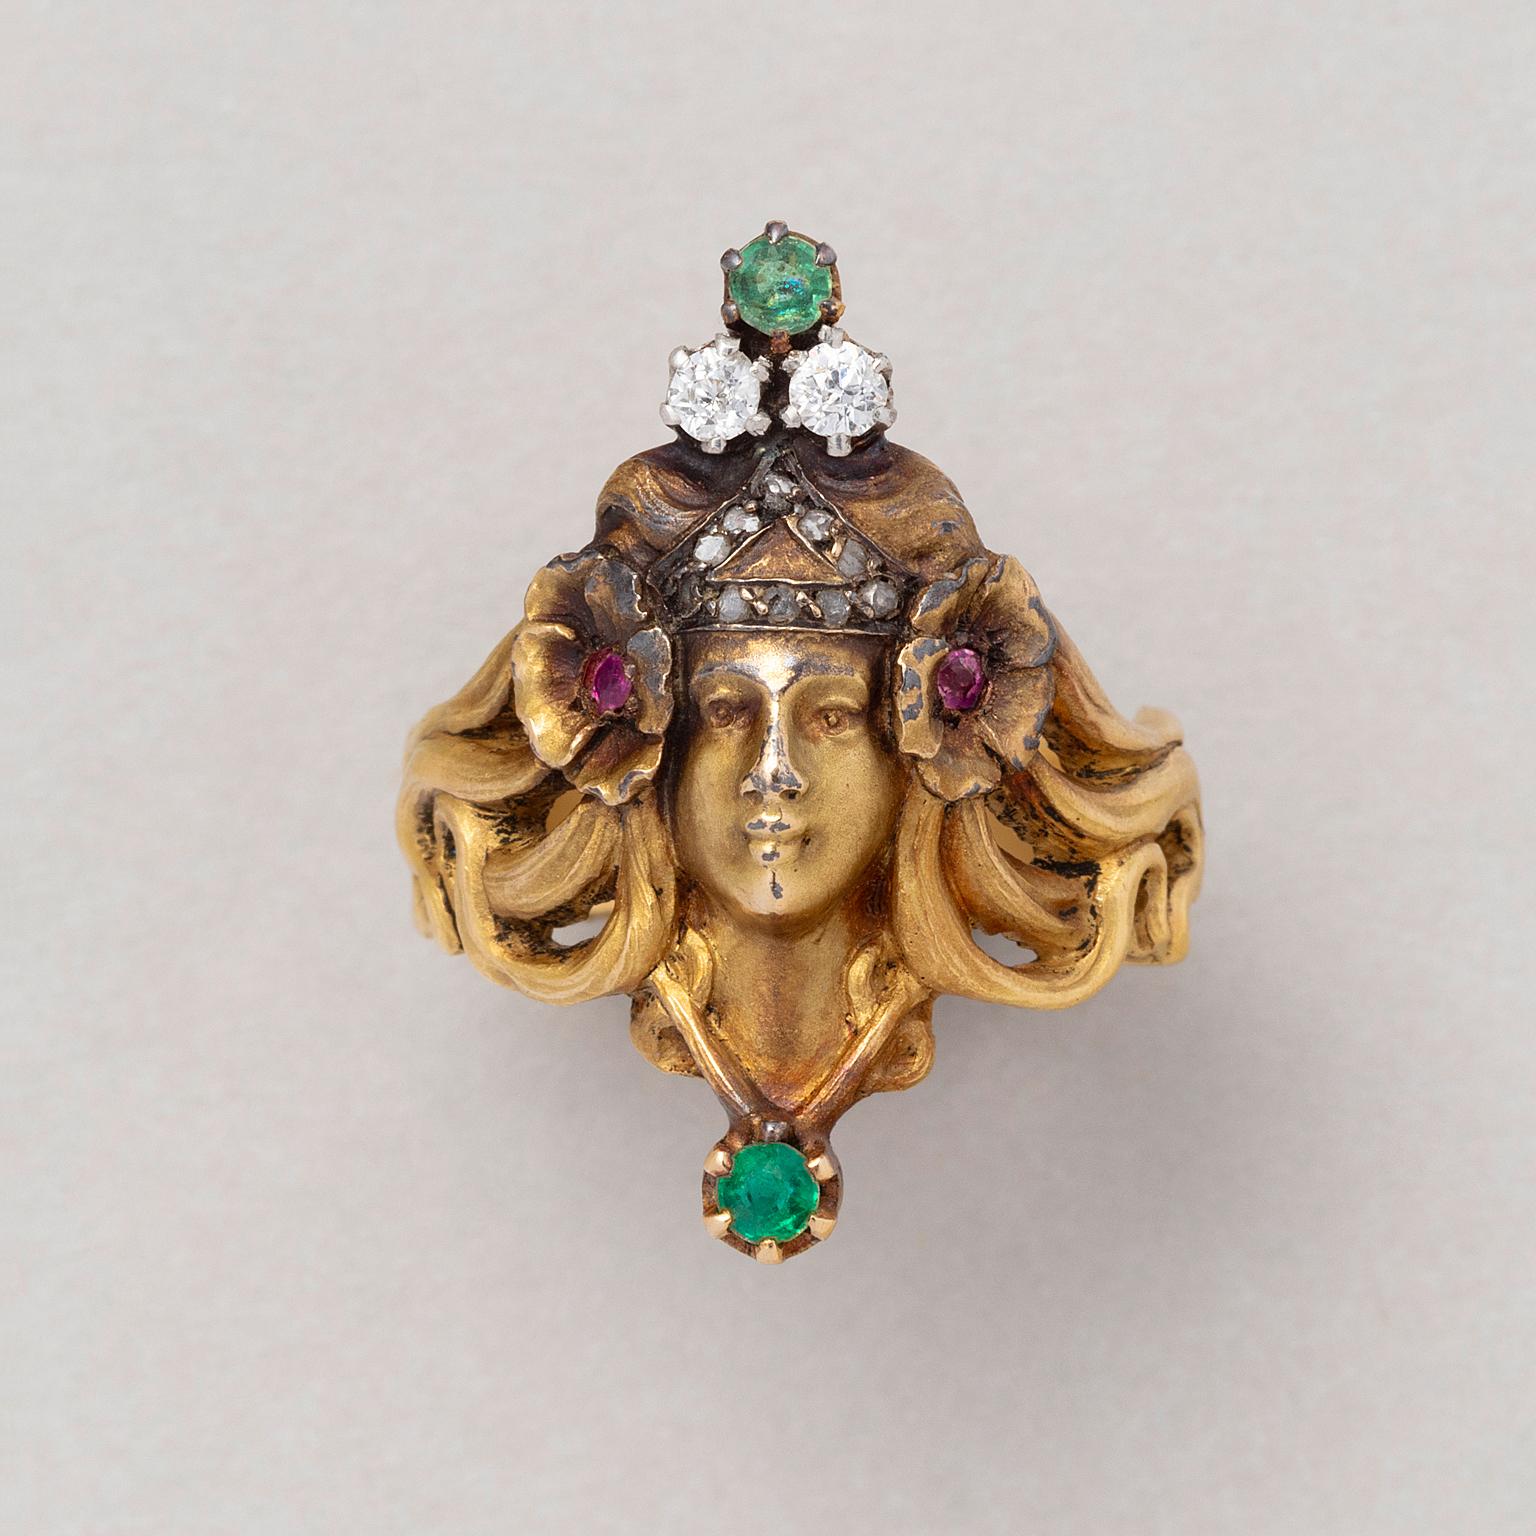 An 18 carat gold Art Nouveau ring featuring a Nymph with long waving hair wearing a tiara set with ten rose cut diamond and on top with two old cut diamonds and an emerald in her hair are two flowers with rubies in the heart of the flowers, France,